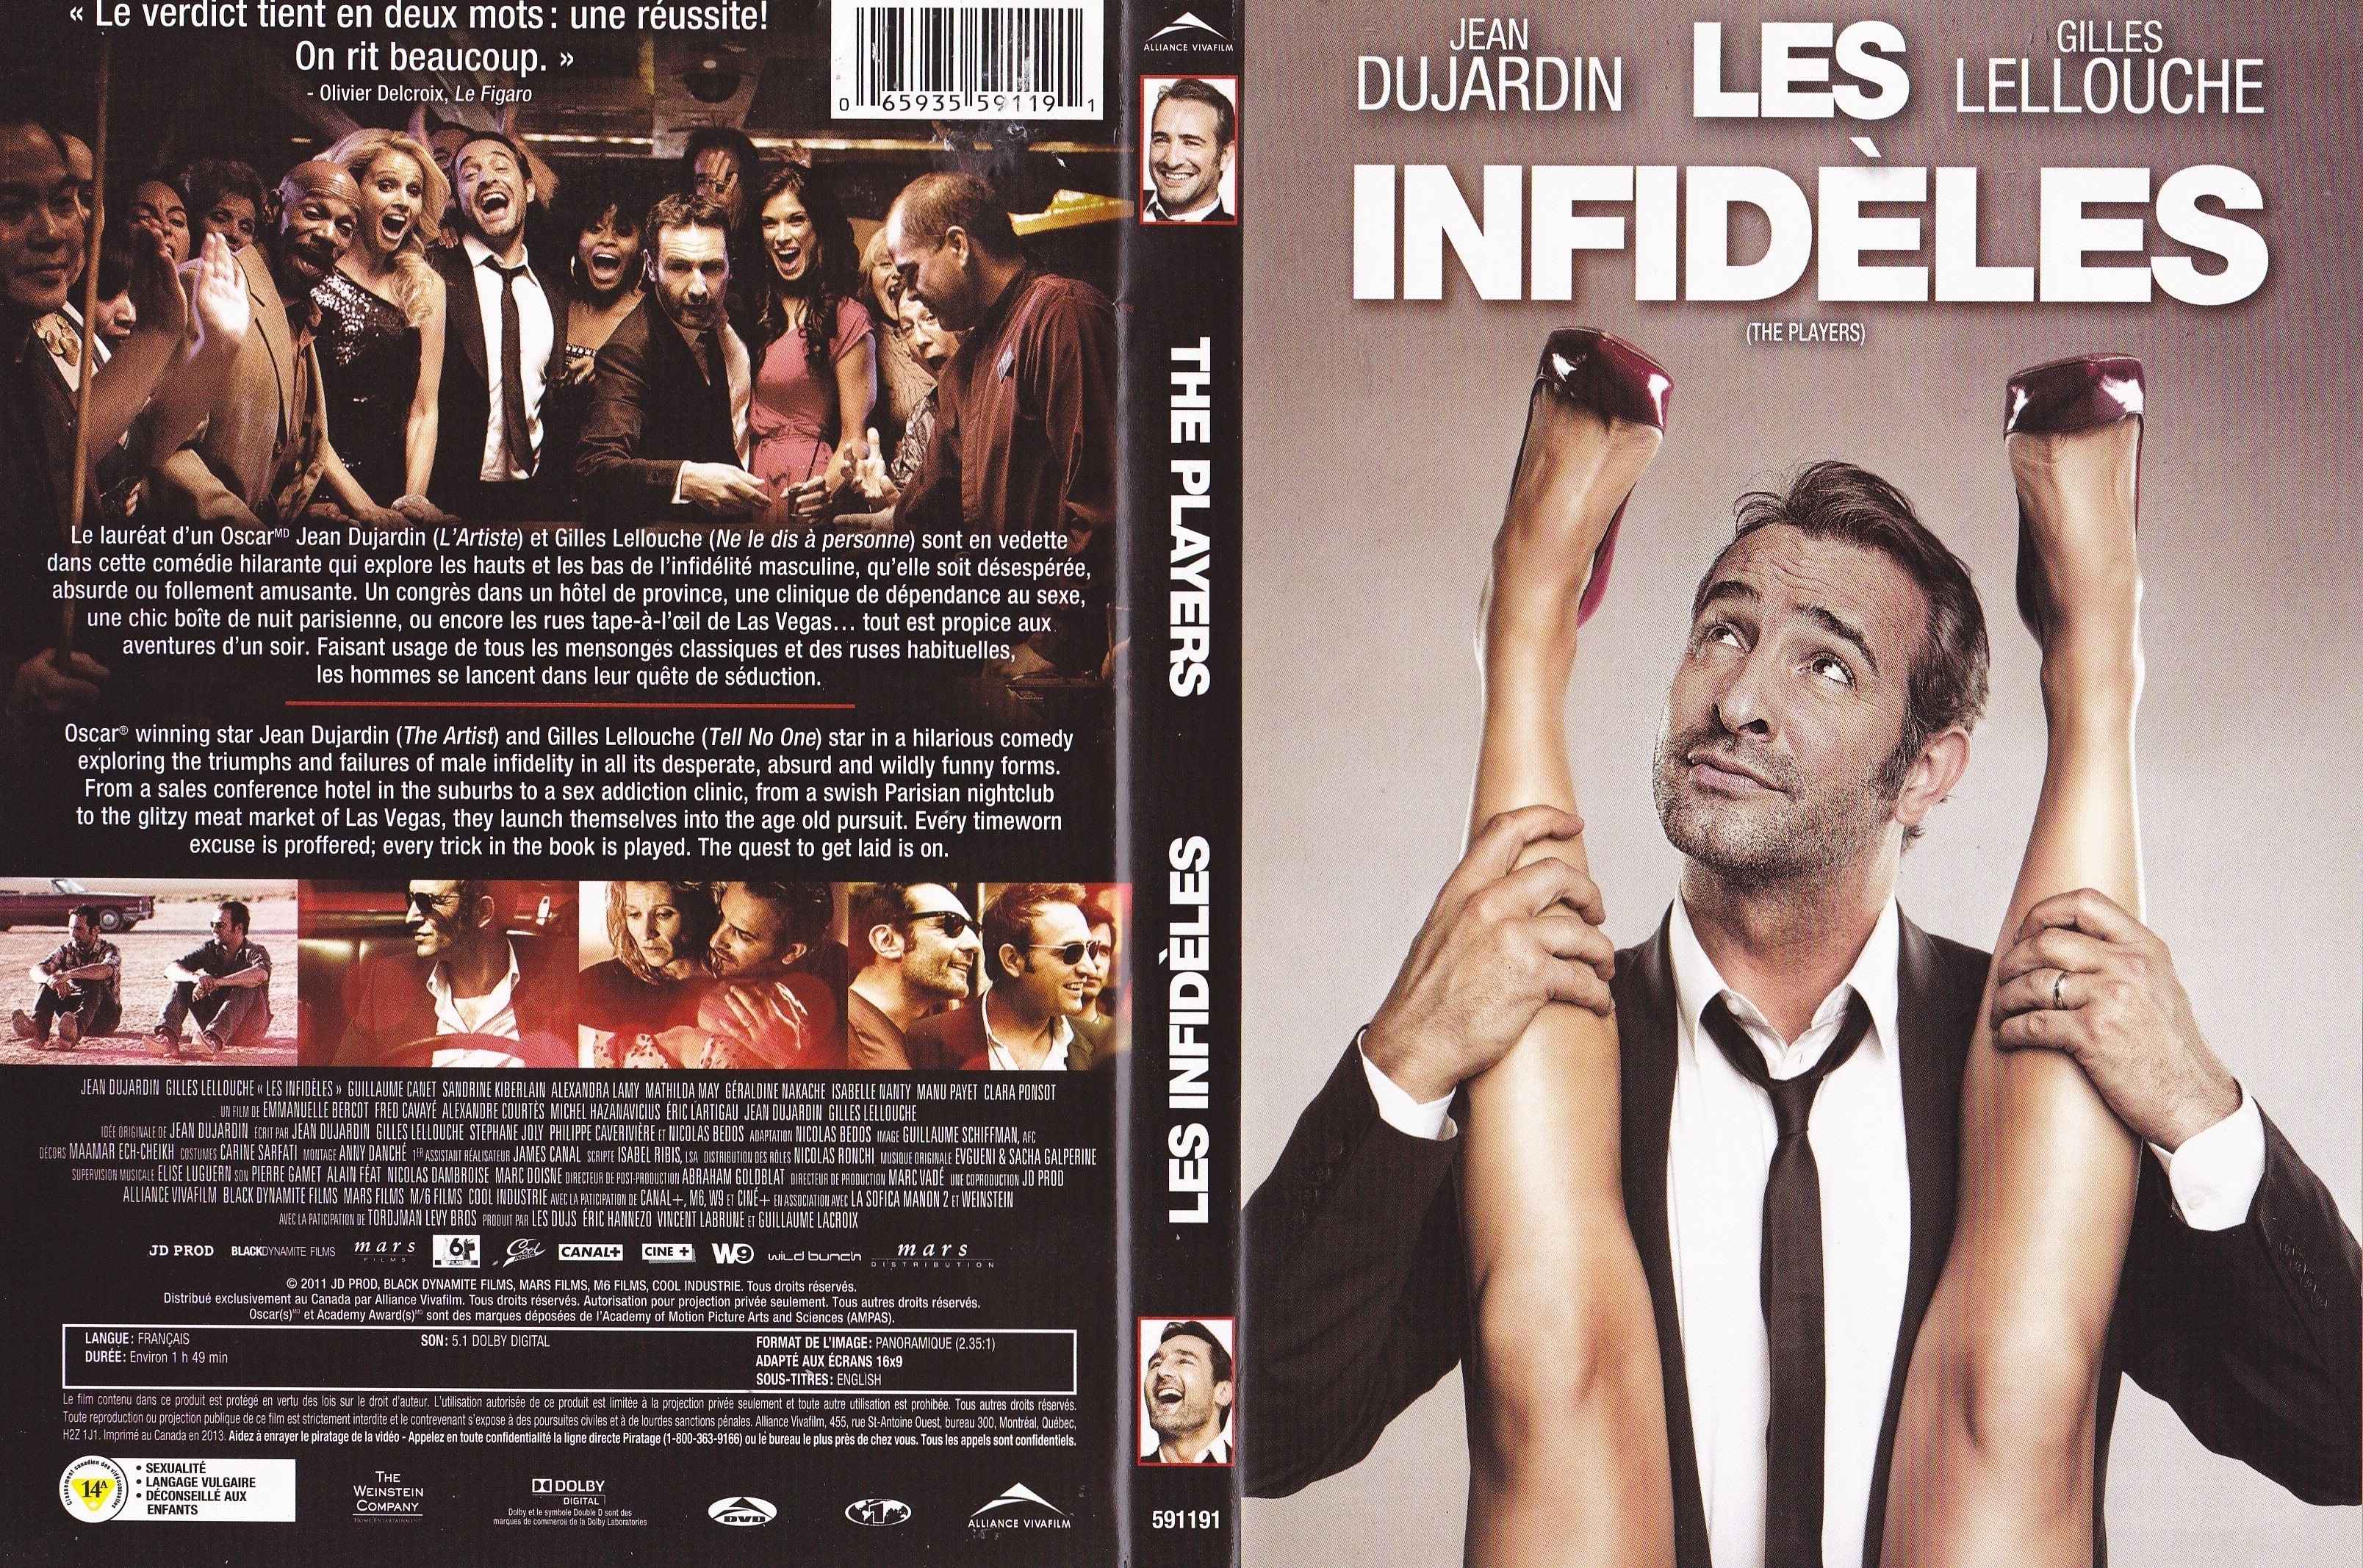 Jaquette DVD Les infidles -  The players (Canadienne)